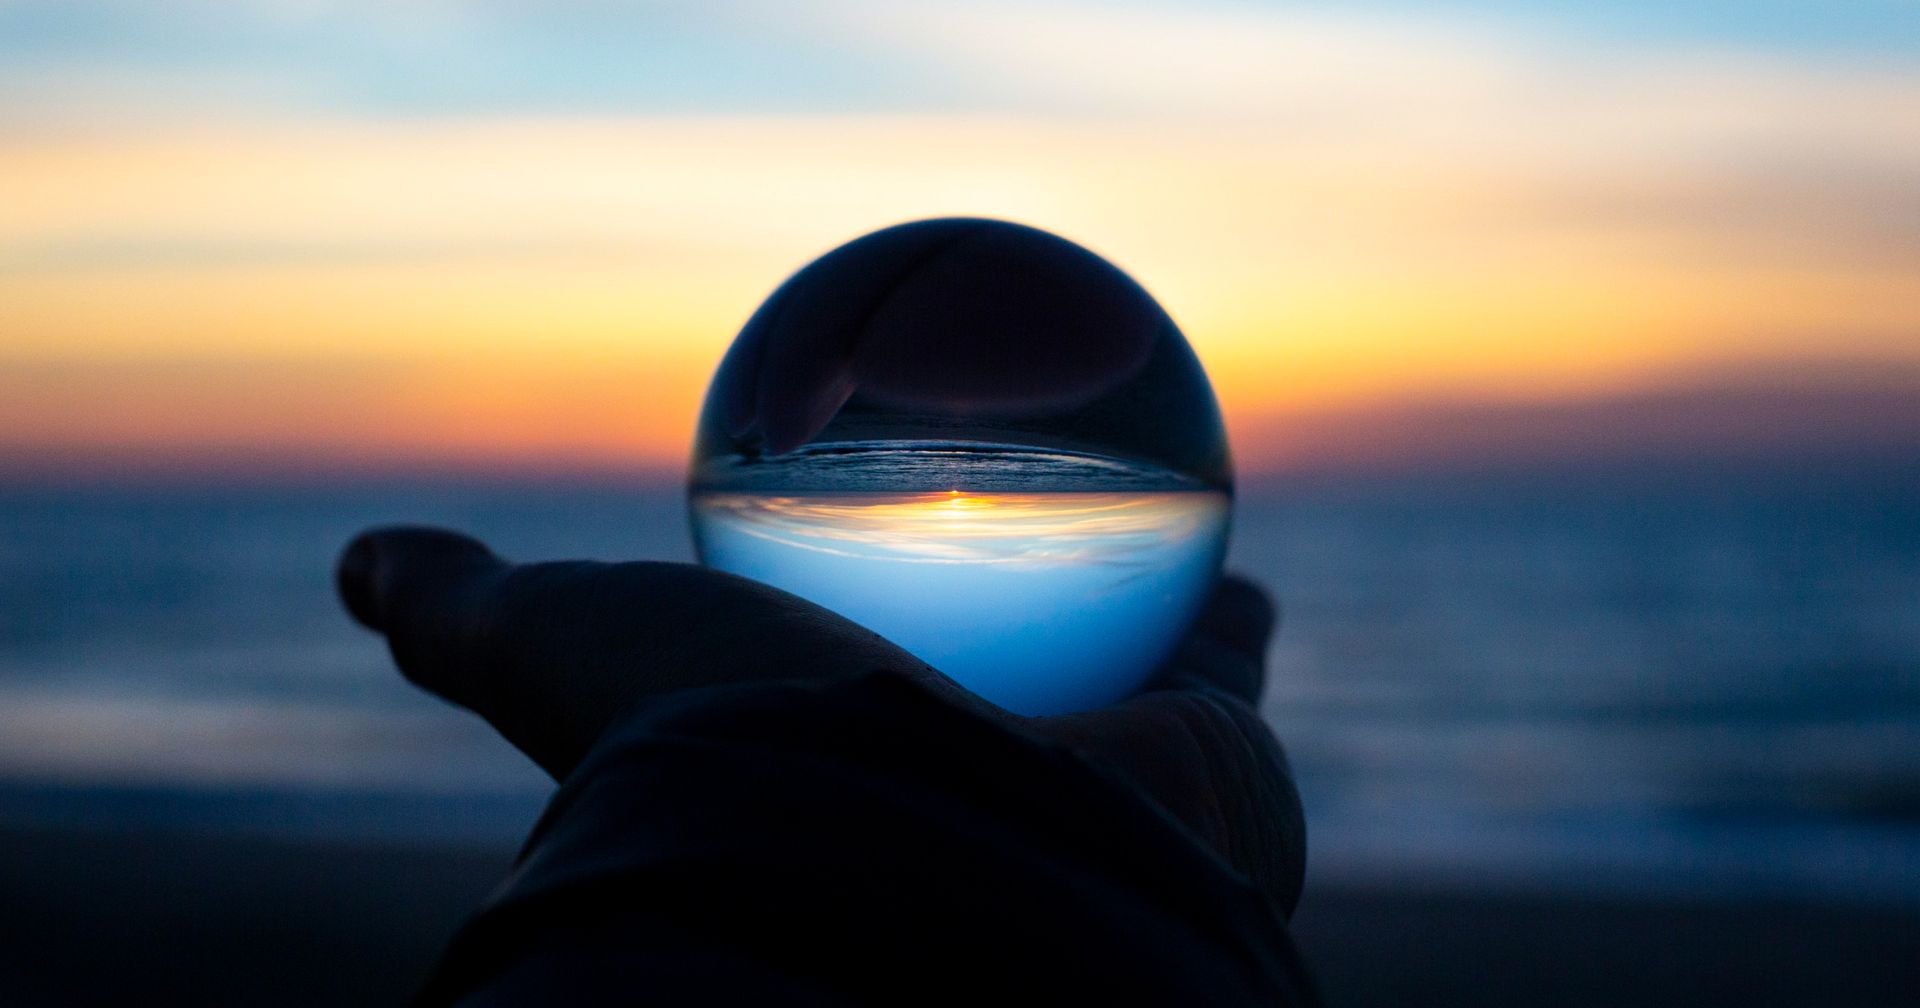 14 Digital Marketing Leaders Give Their Predictions on the Future of Marketing